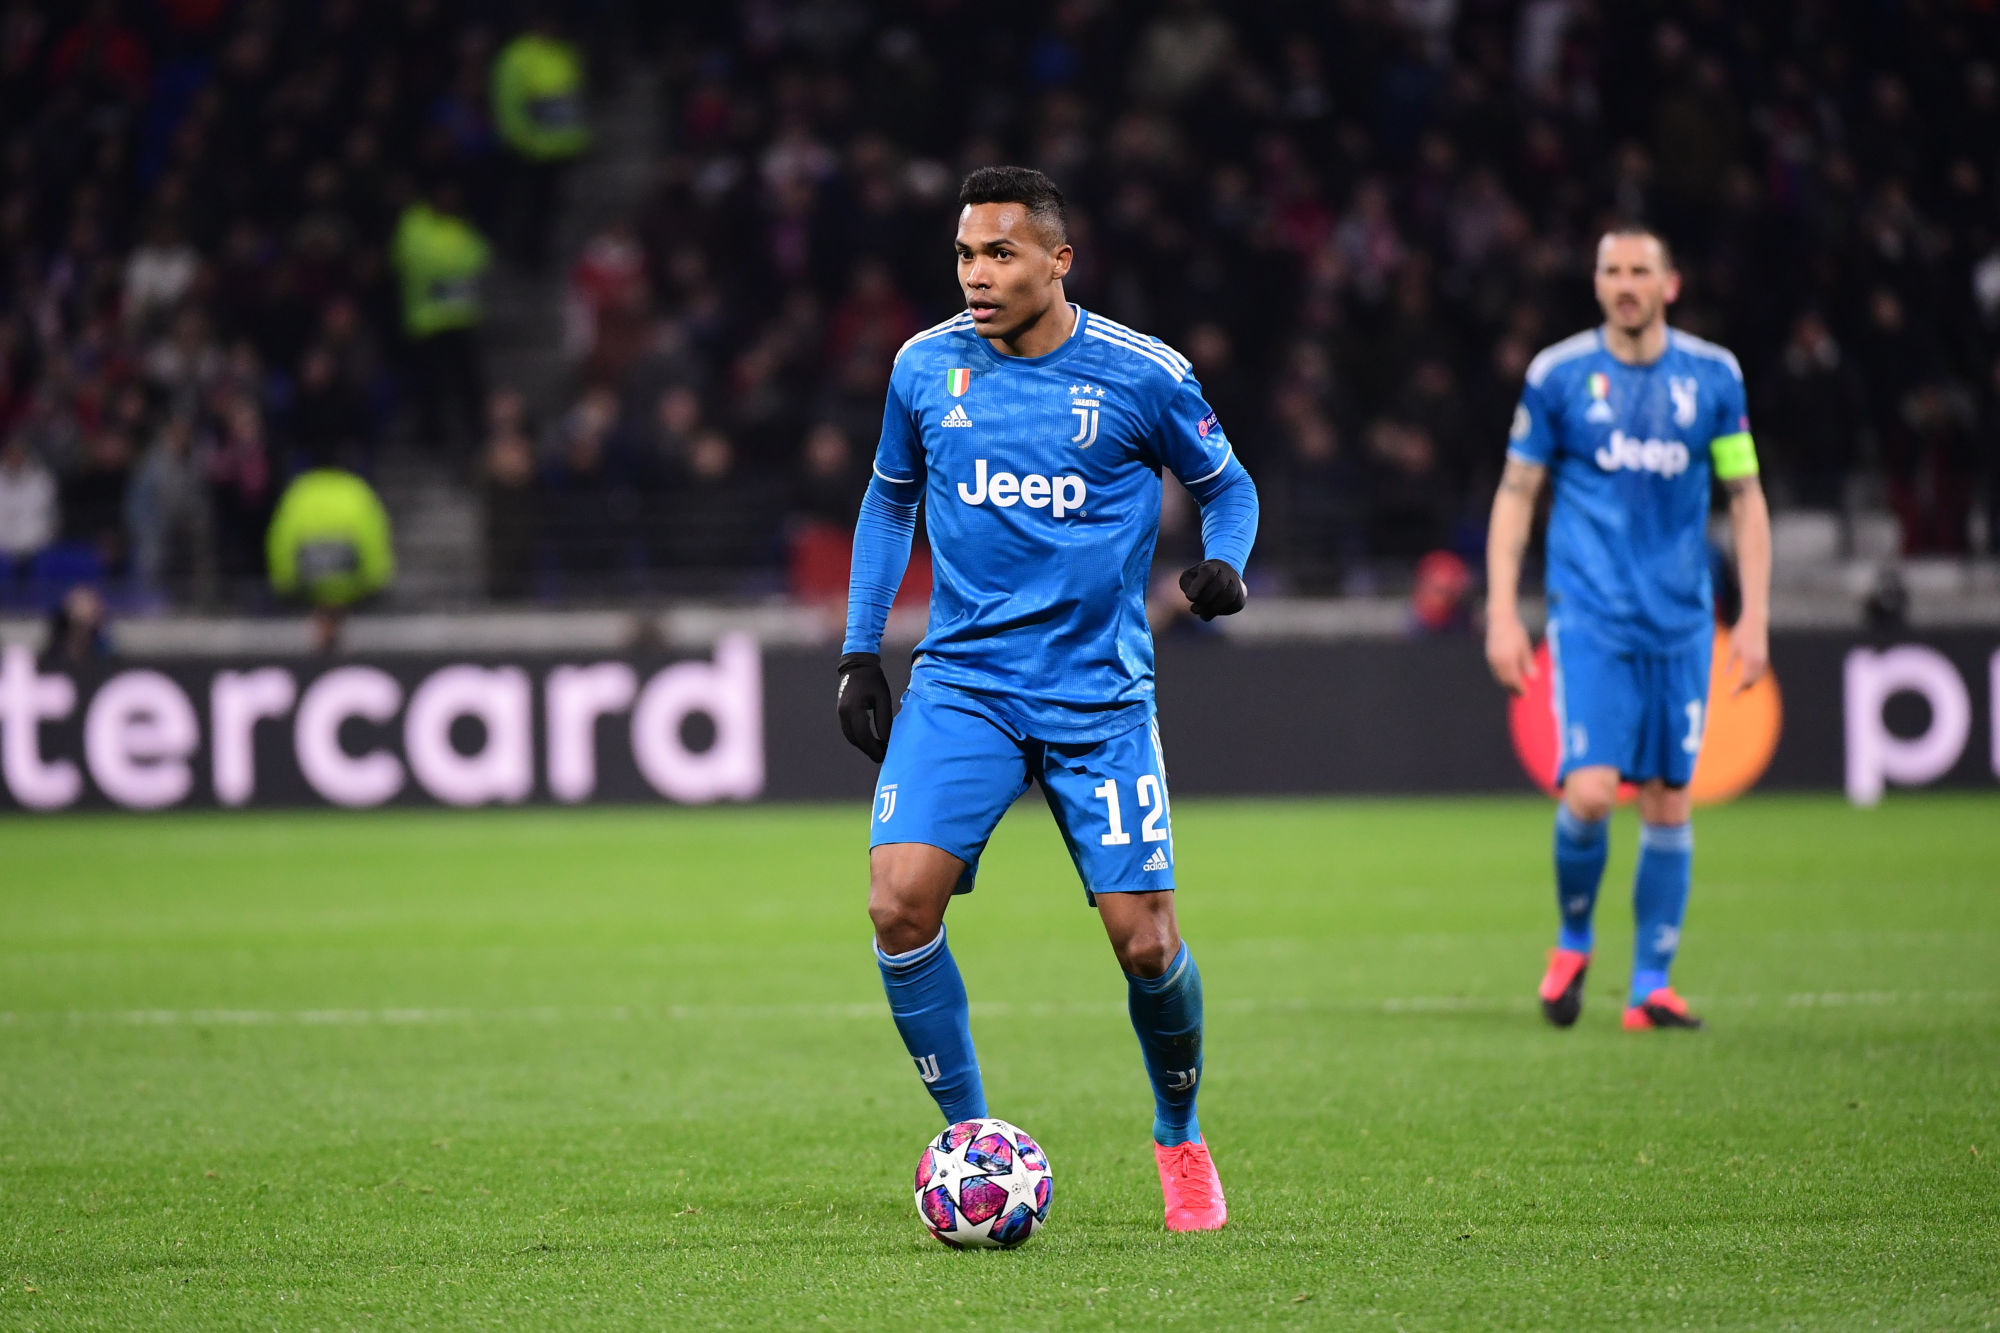 Alex SANDRO Lobo Silva of Juventus during the UEFA Champions League round of 16 first leg match between Lyon and Juventus at Groupama Stadium on February 26, 2020 in Lyon, France. (Photo by Dave Winter/Icon Sport) - Alex SANDRO - Groupama Stadium - Lyon (France)